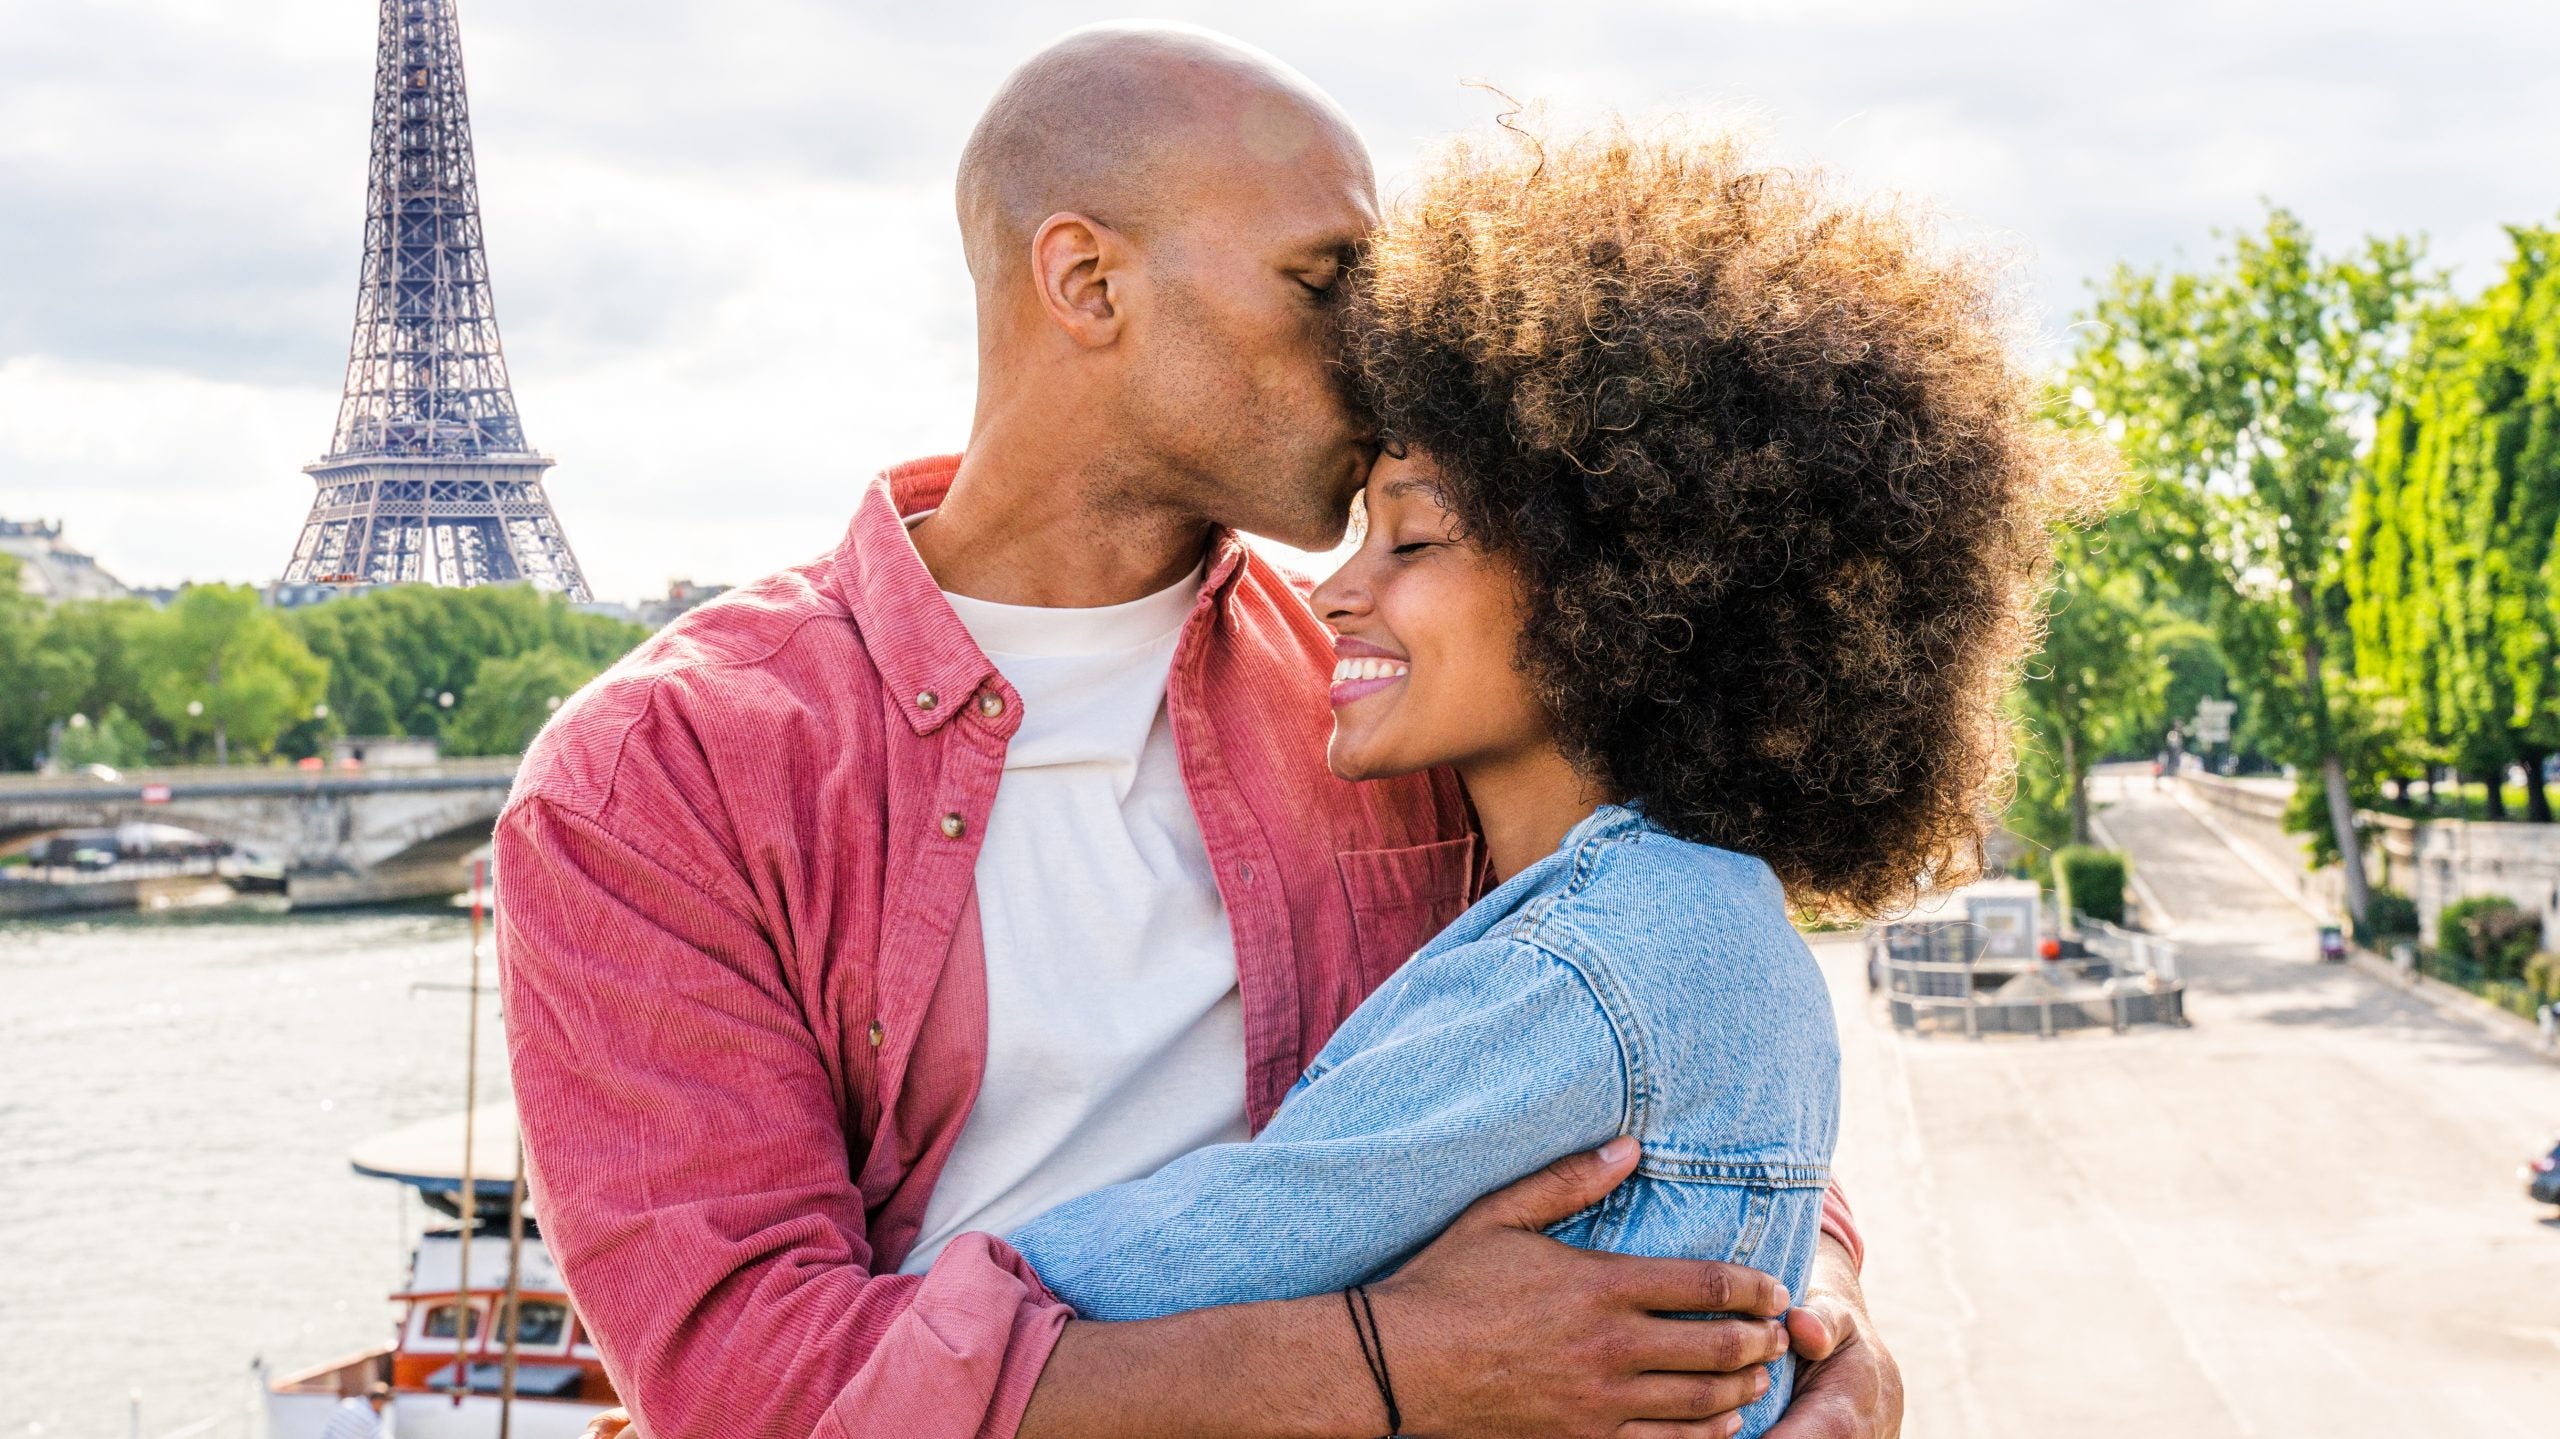 Here's What Experts Say You Should Do If Your Baecation Turns Sour